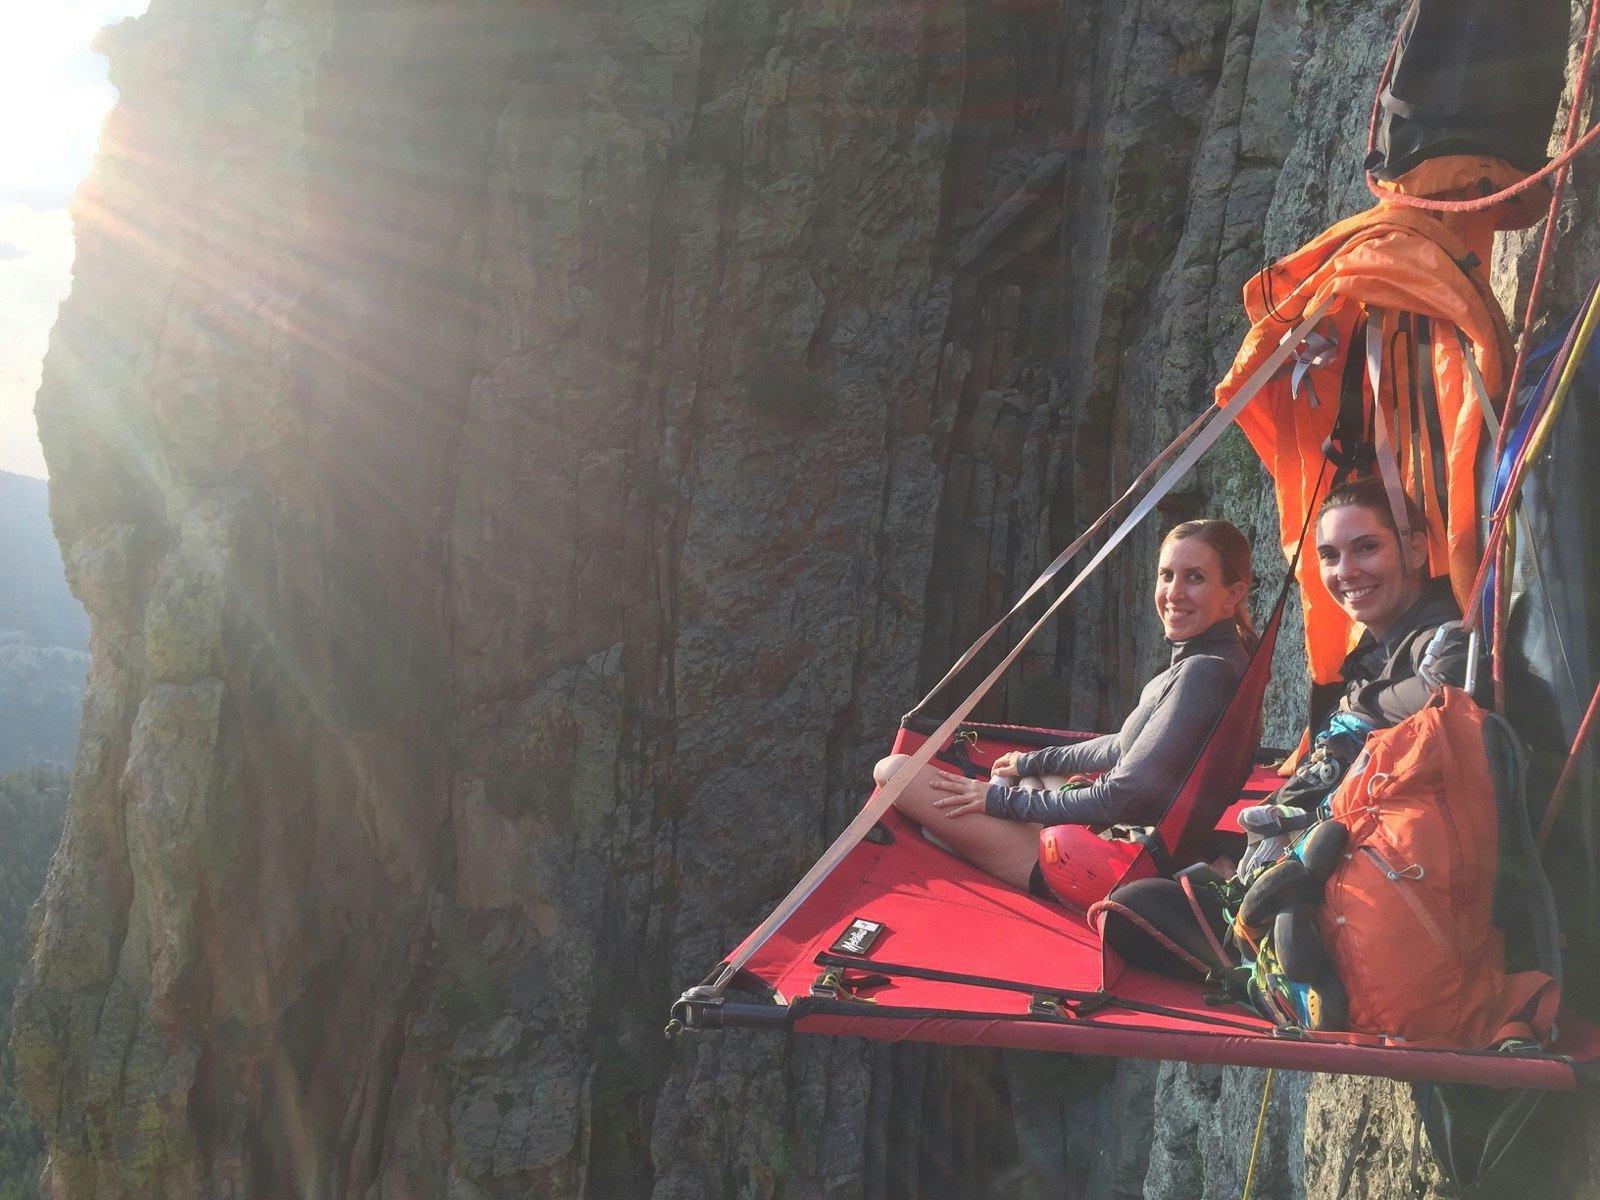 Two women sit on a hanging platform on the side of a cliff